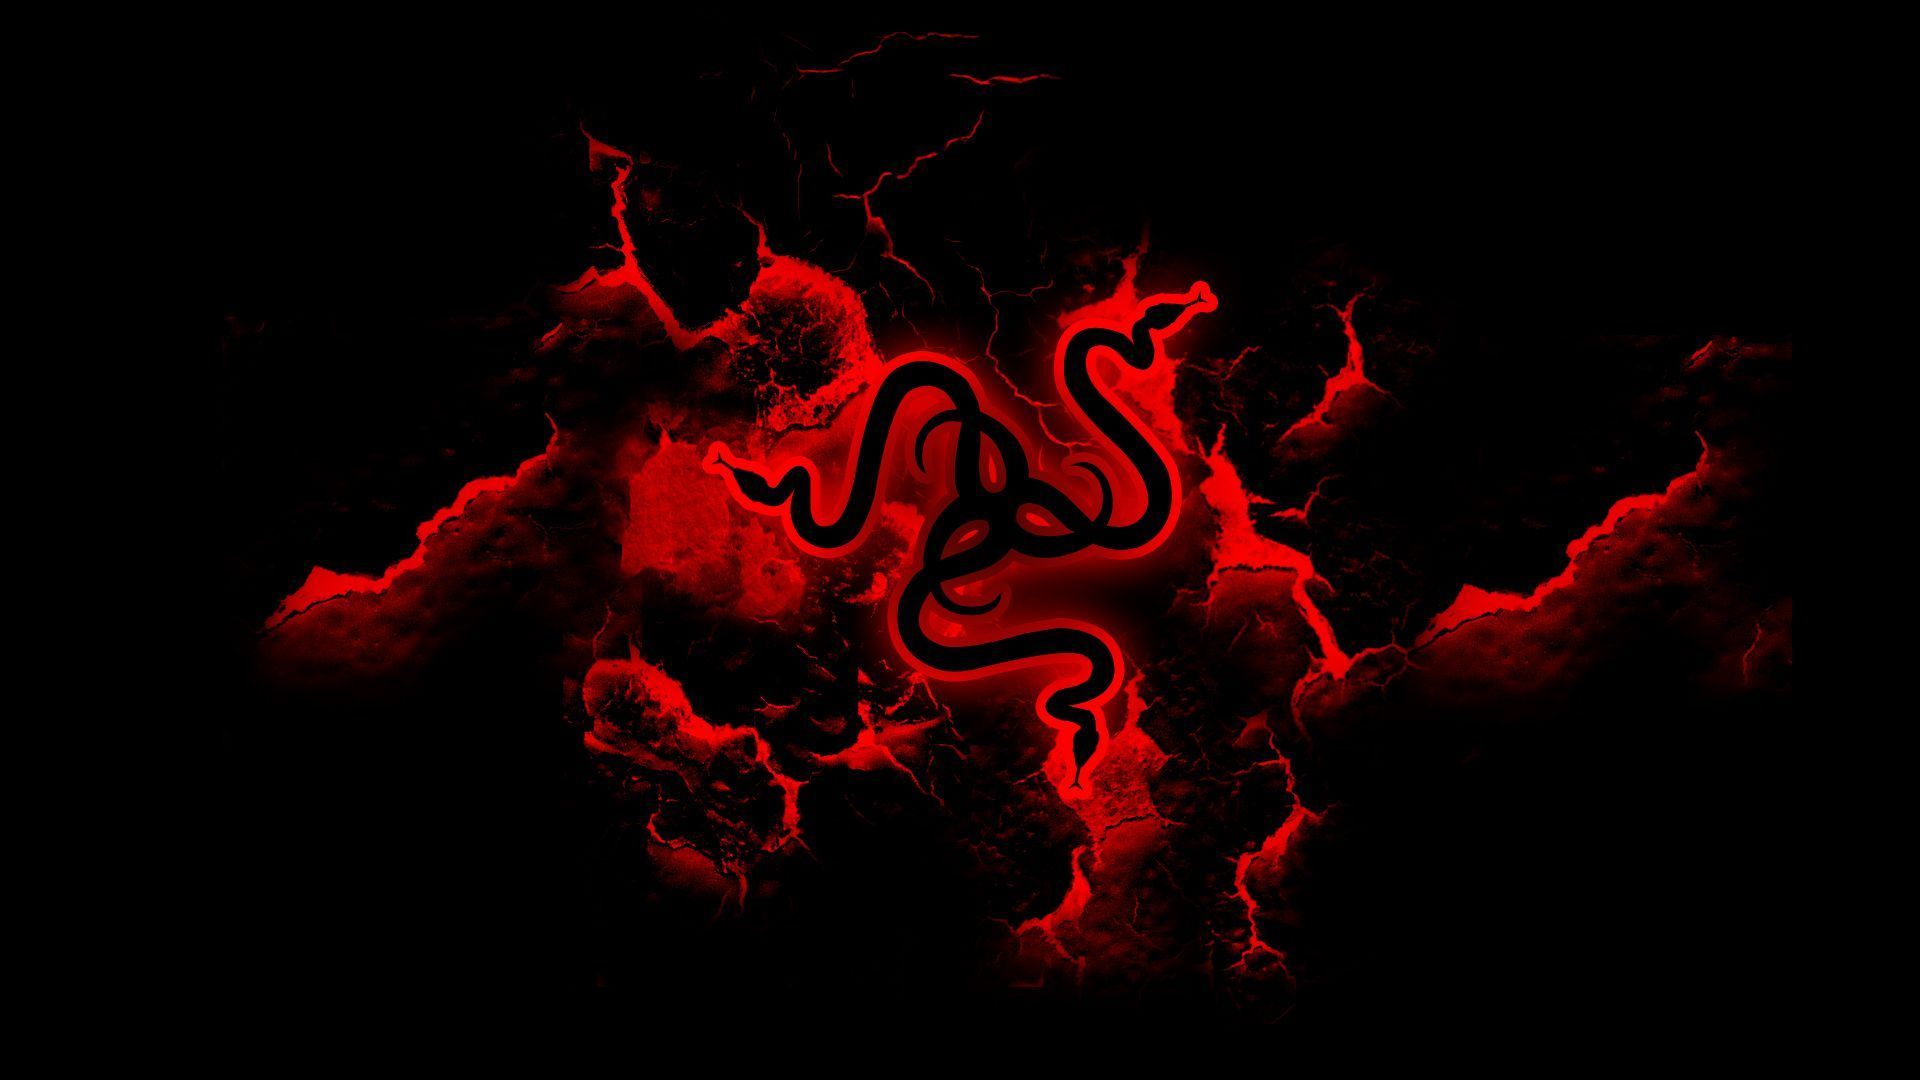 melhores wallpapers hd para pc,red,black,flame,heat,font